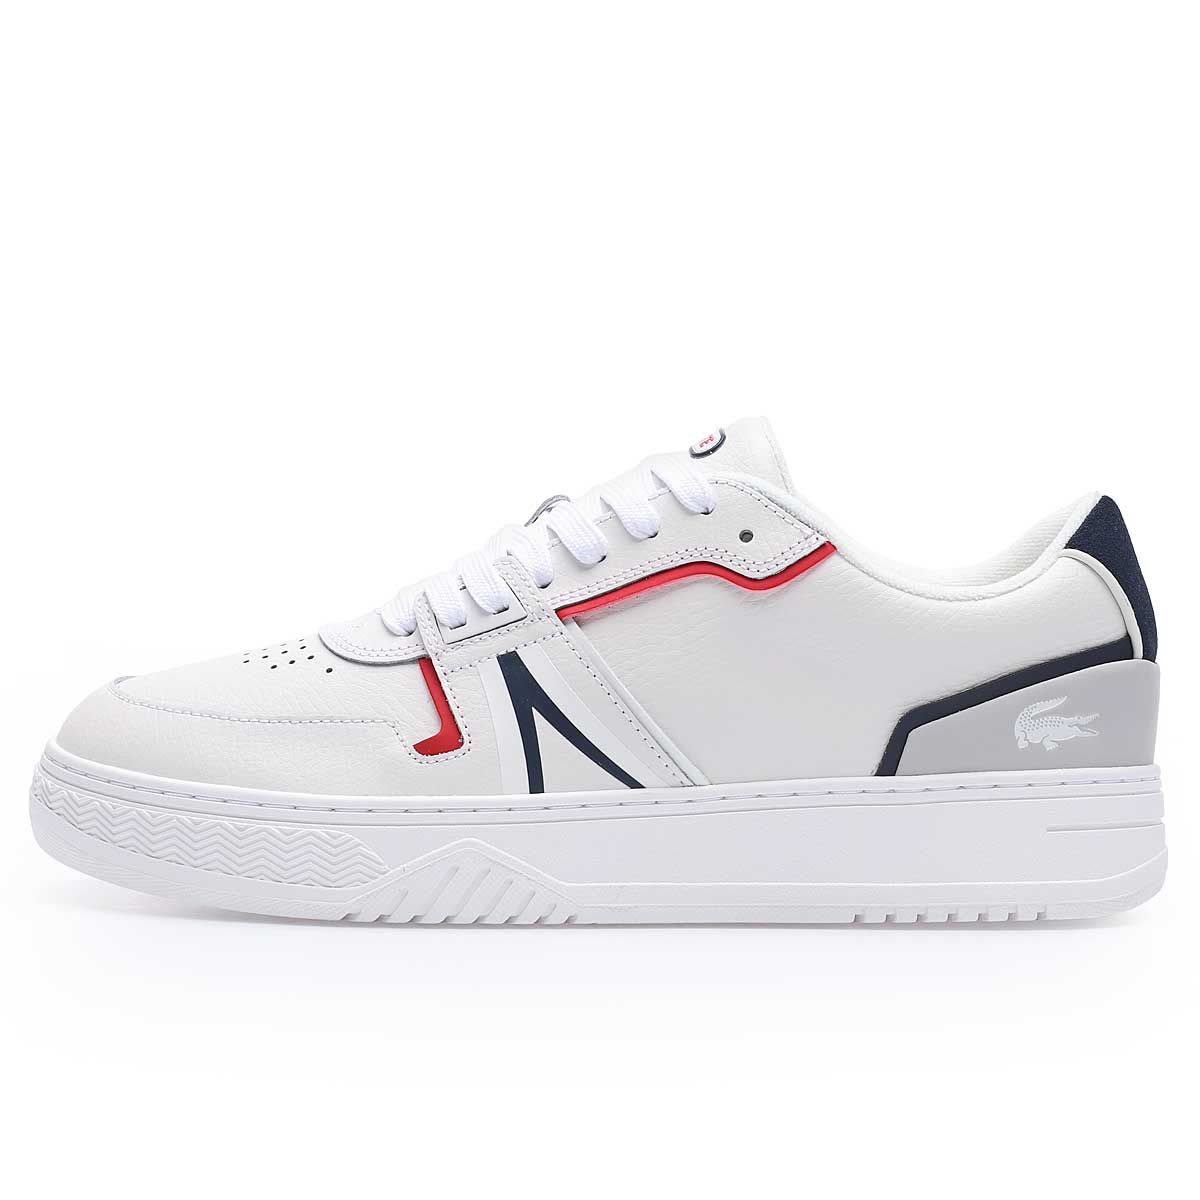 Lacoste L001 0321 1 Sma, Wht/Nvy/Red